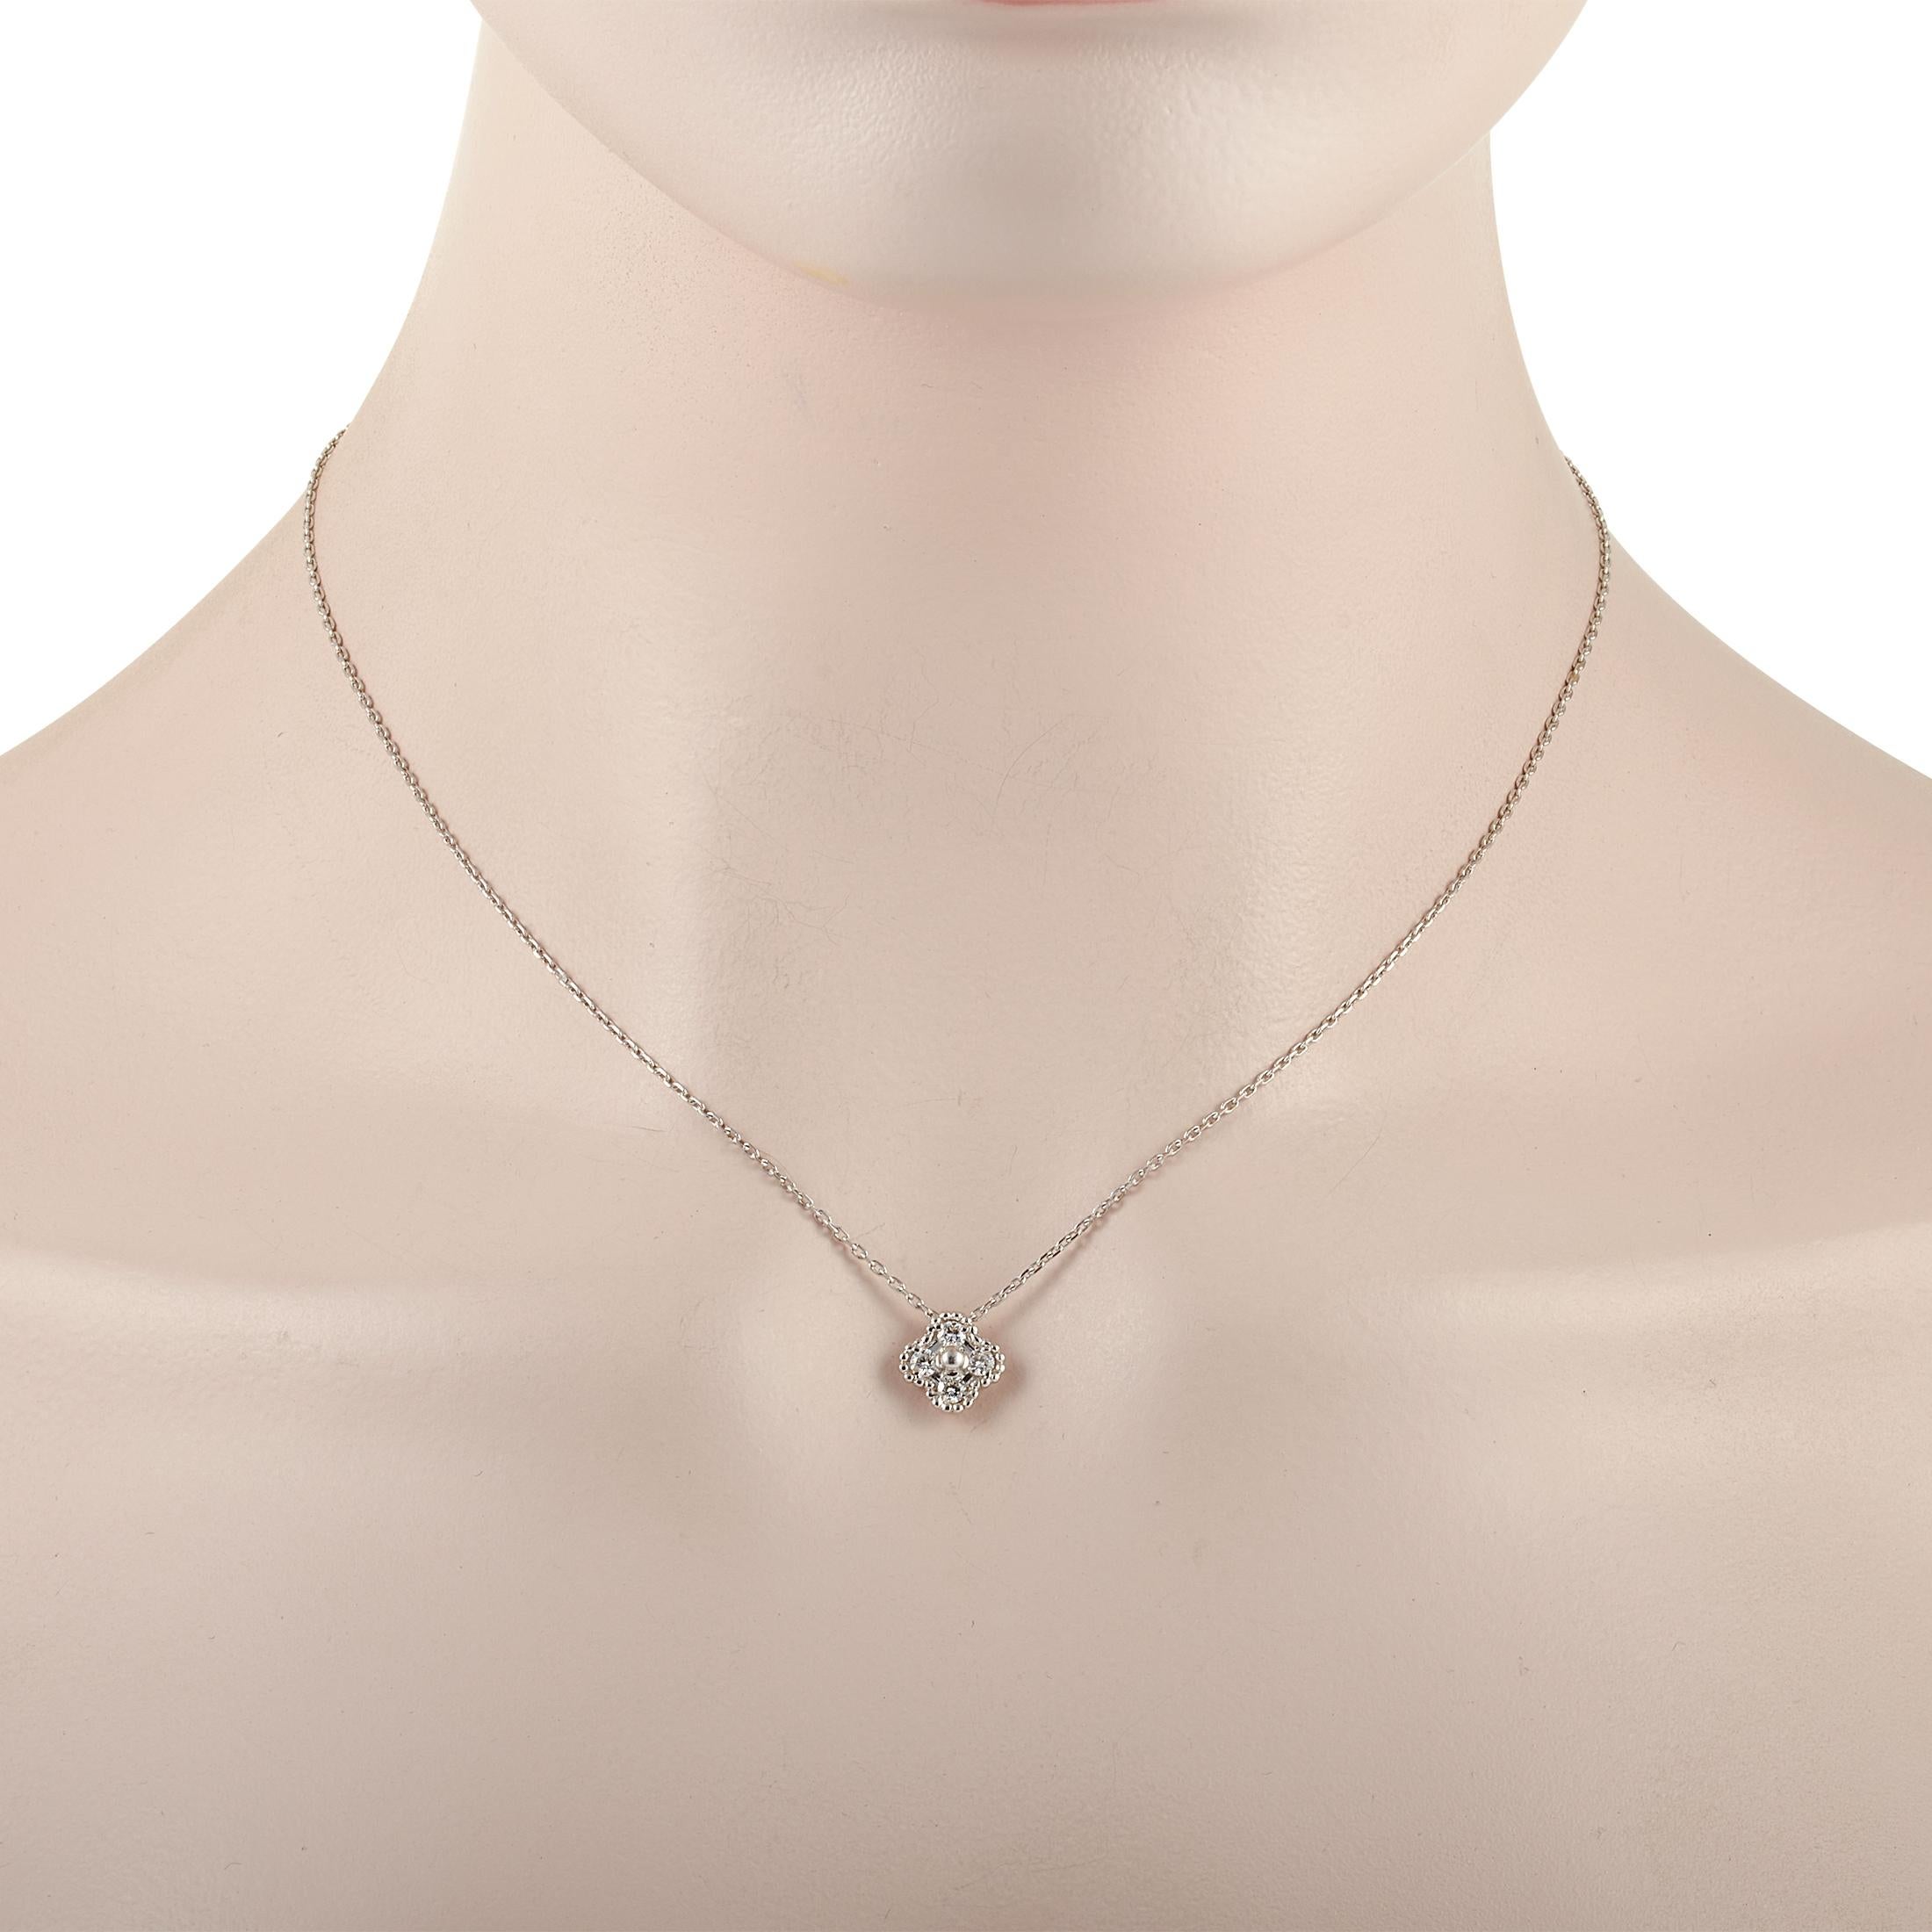 This classic Van Cleef & Arpels Sweet Alhambra 18K White Gold Diamond Necklace is made with an 18K white gold chain that highlights a white gold Alhambra pendant set with four round diamonds. The dainty chain measures 16 inches in length and